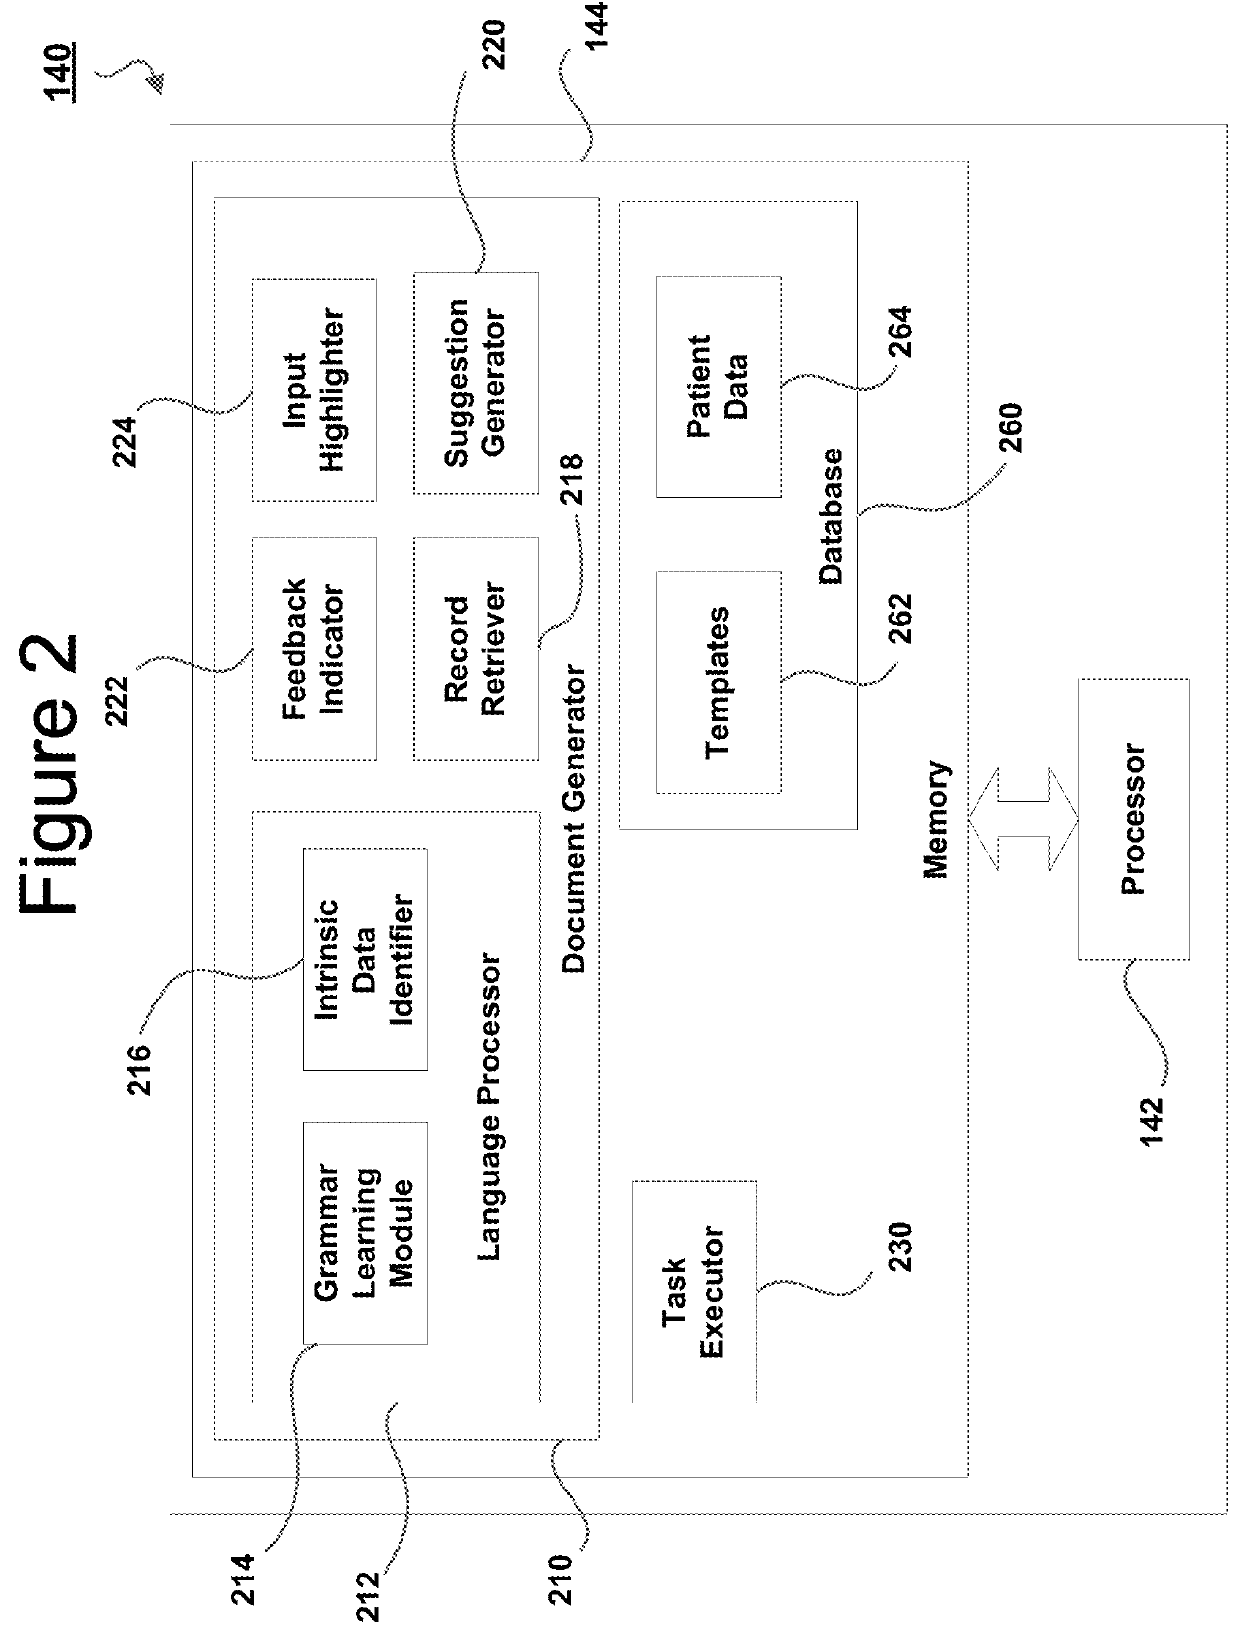 Systems and methods for generating and updating electronic medical records